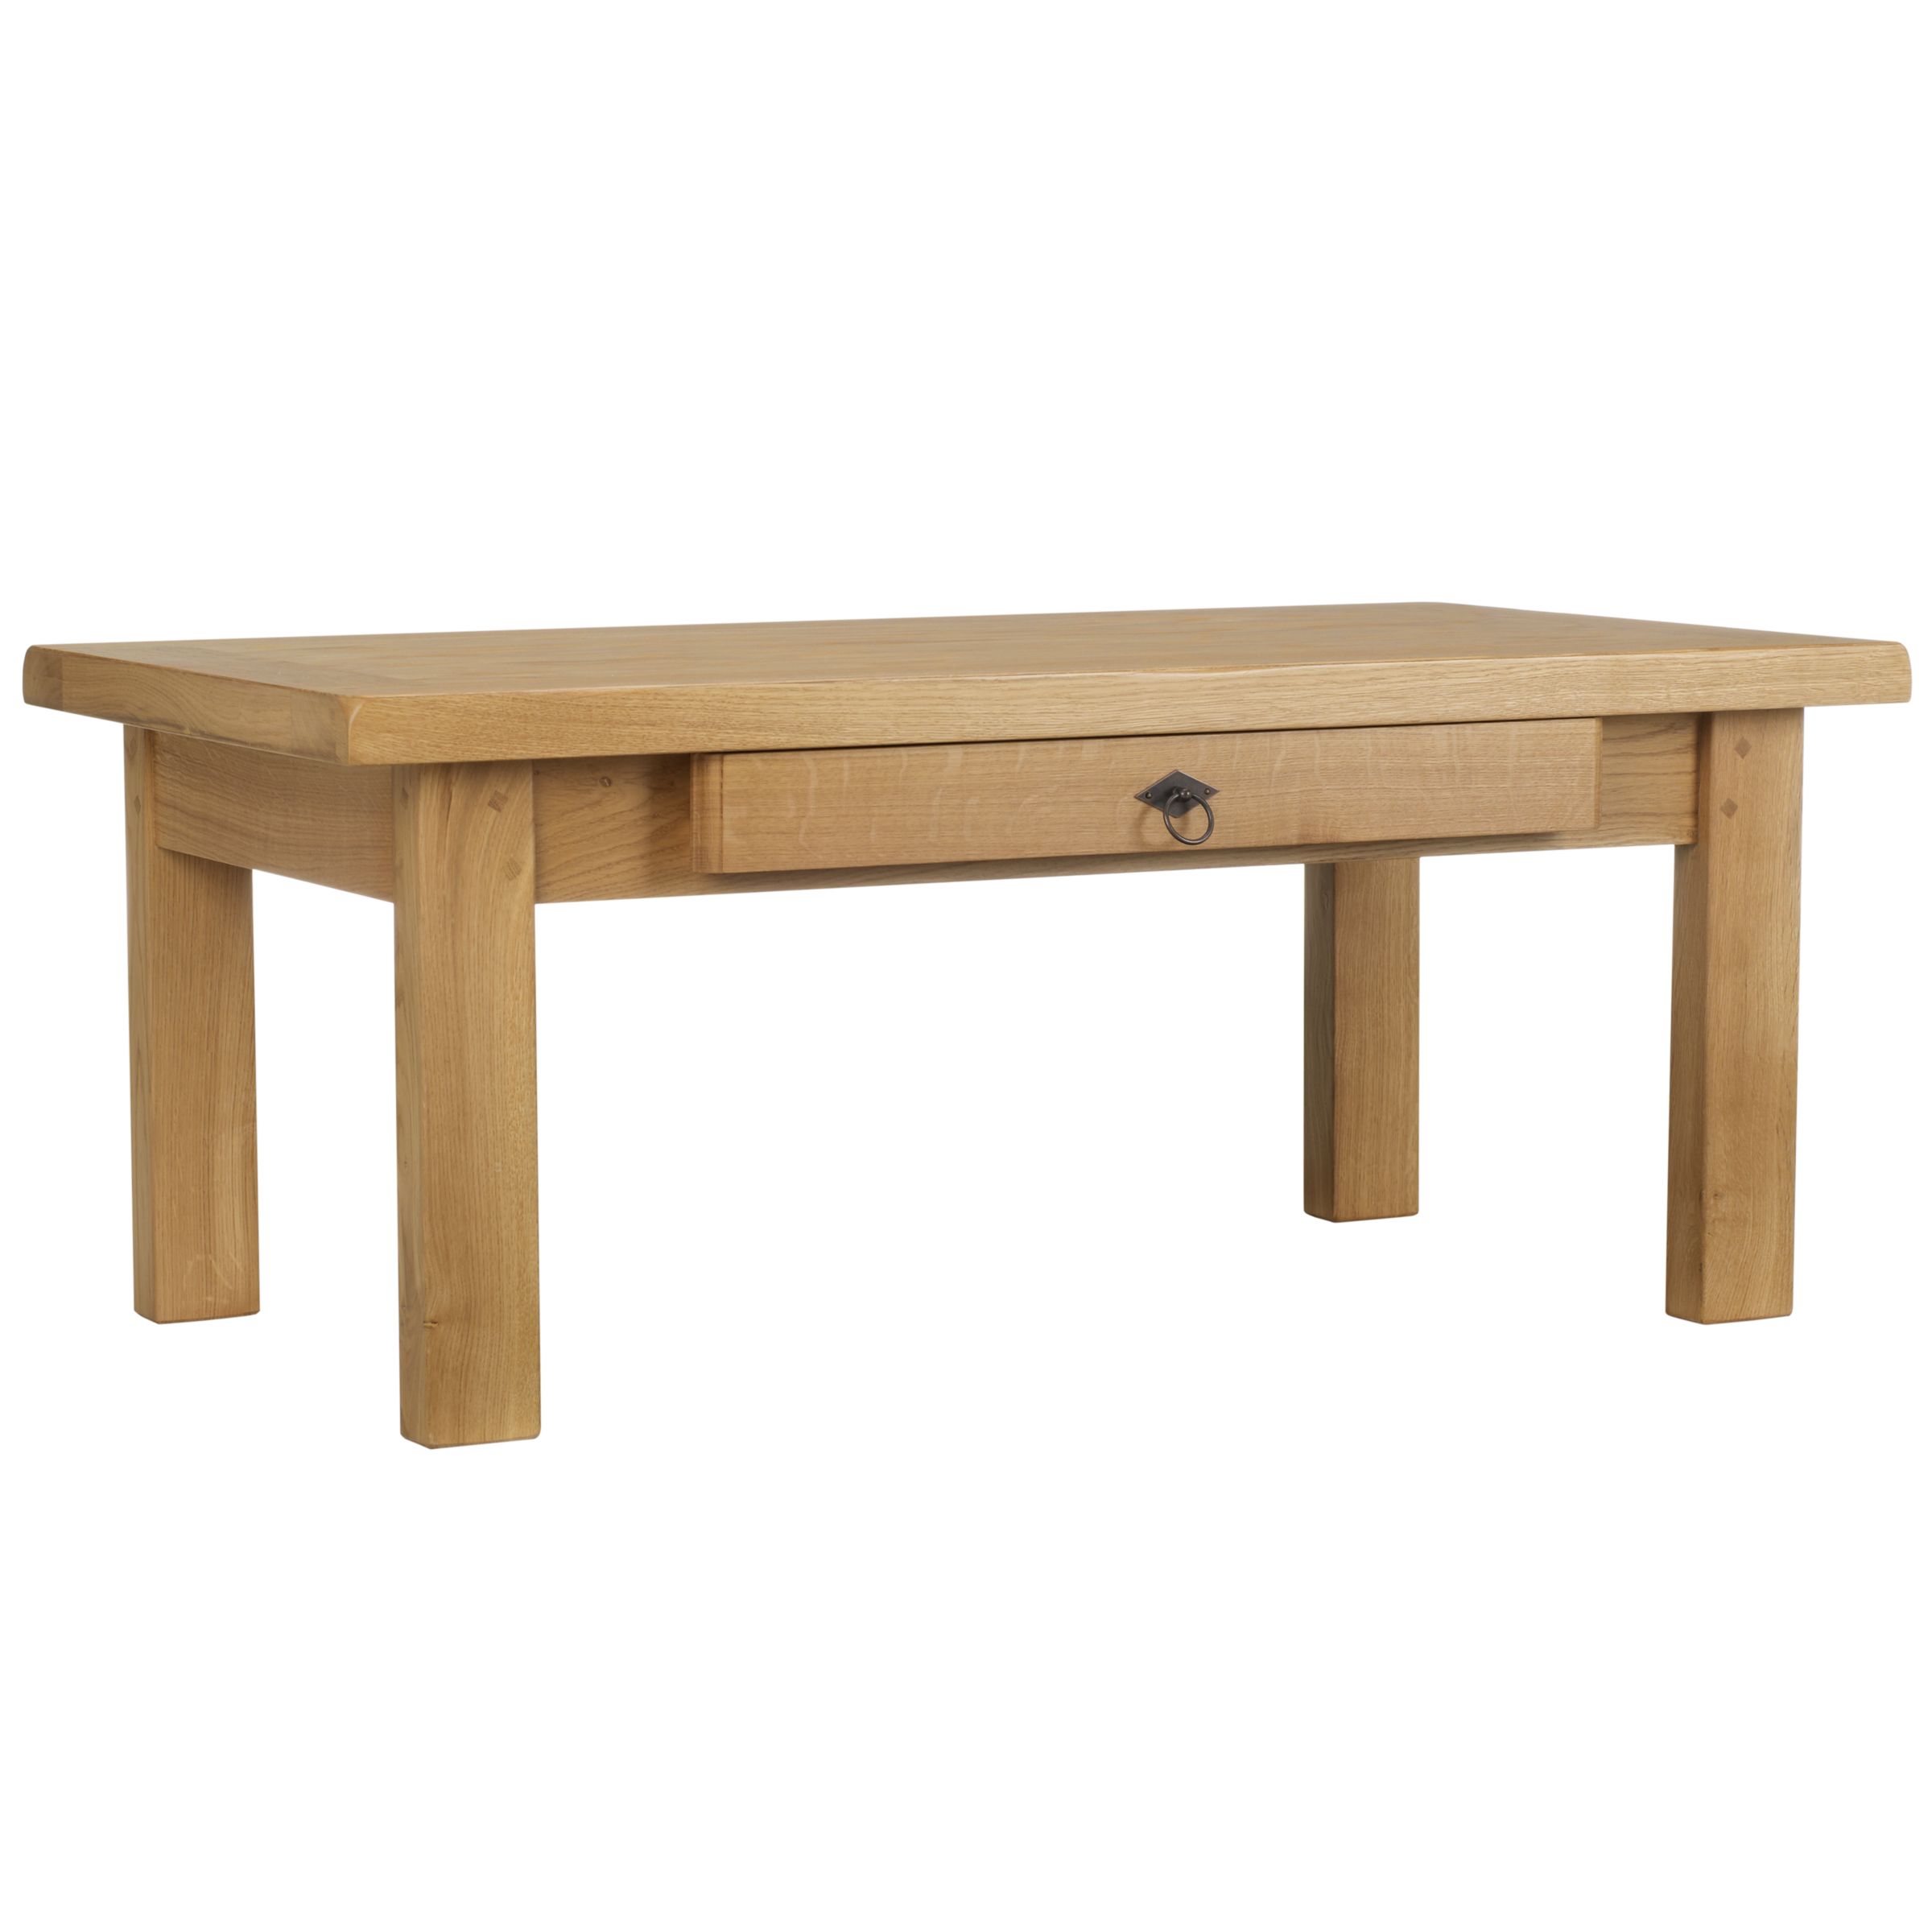 Ardennes Coffee Table, Sarlat at John Lewis